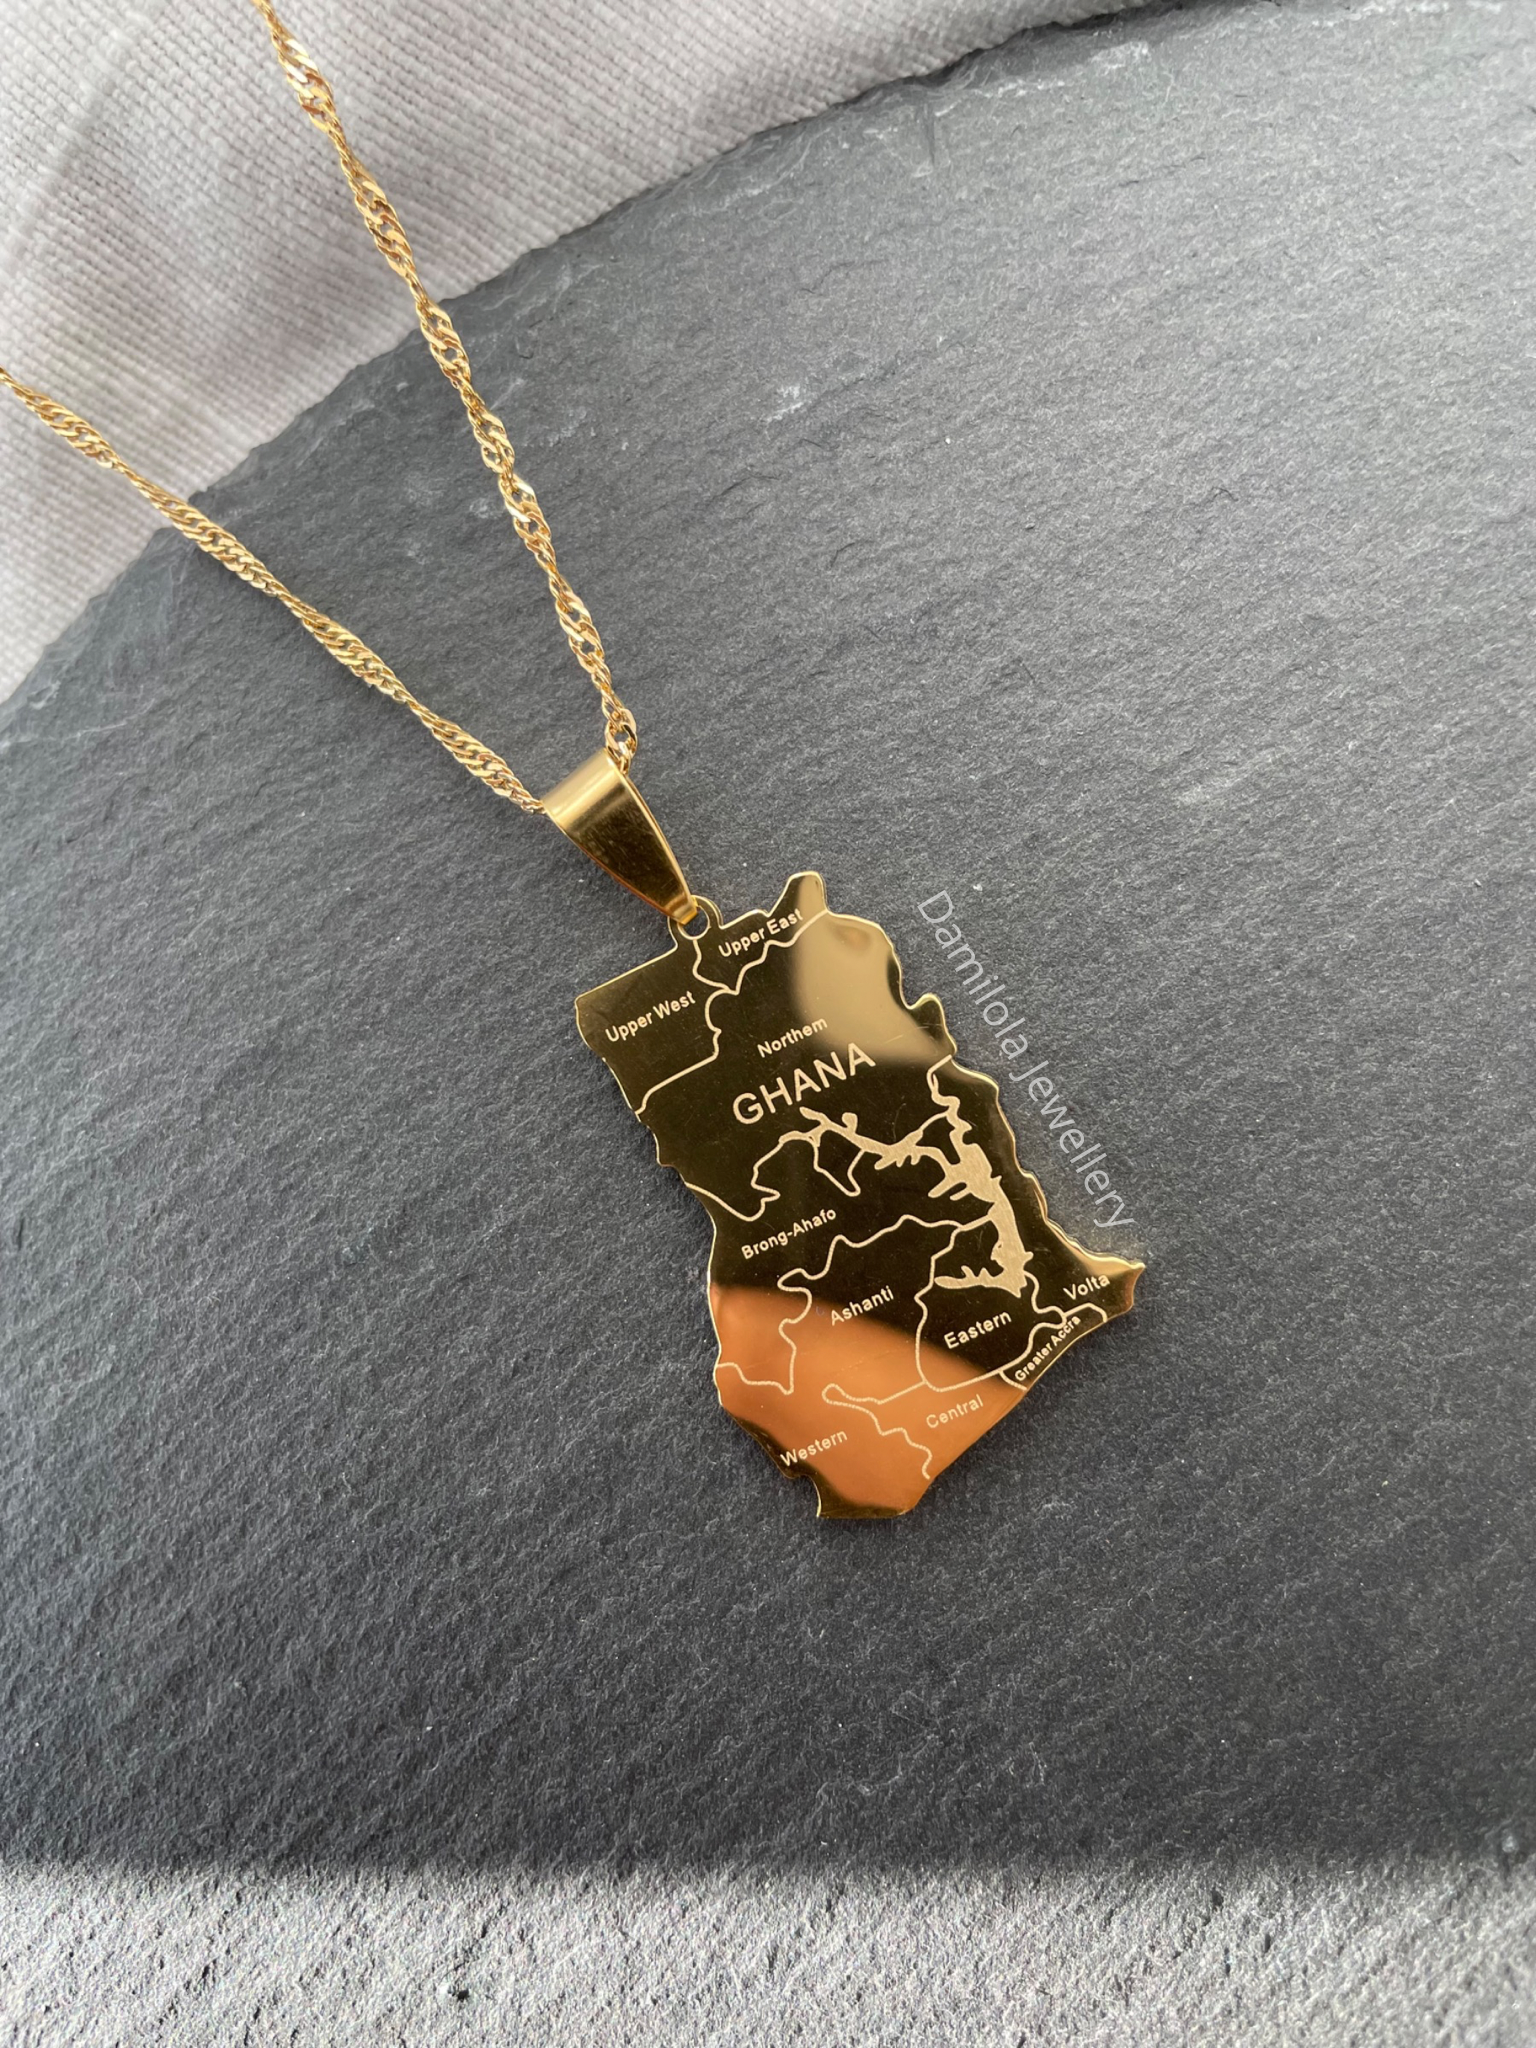 Ghana Engraved Map Necklace - Gold/Silver 🇬🇭 'Freedom and Justice'